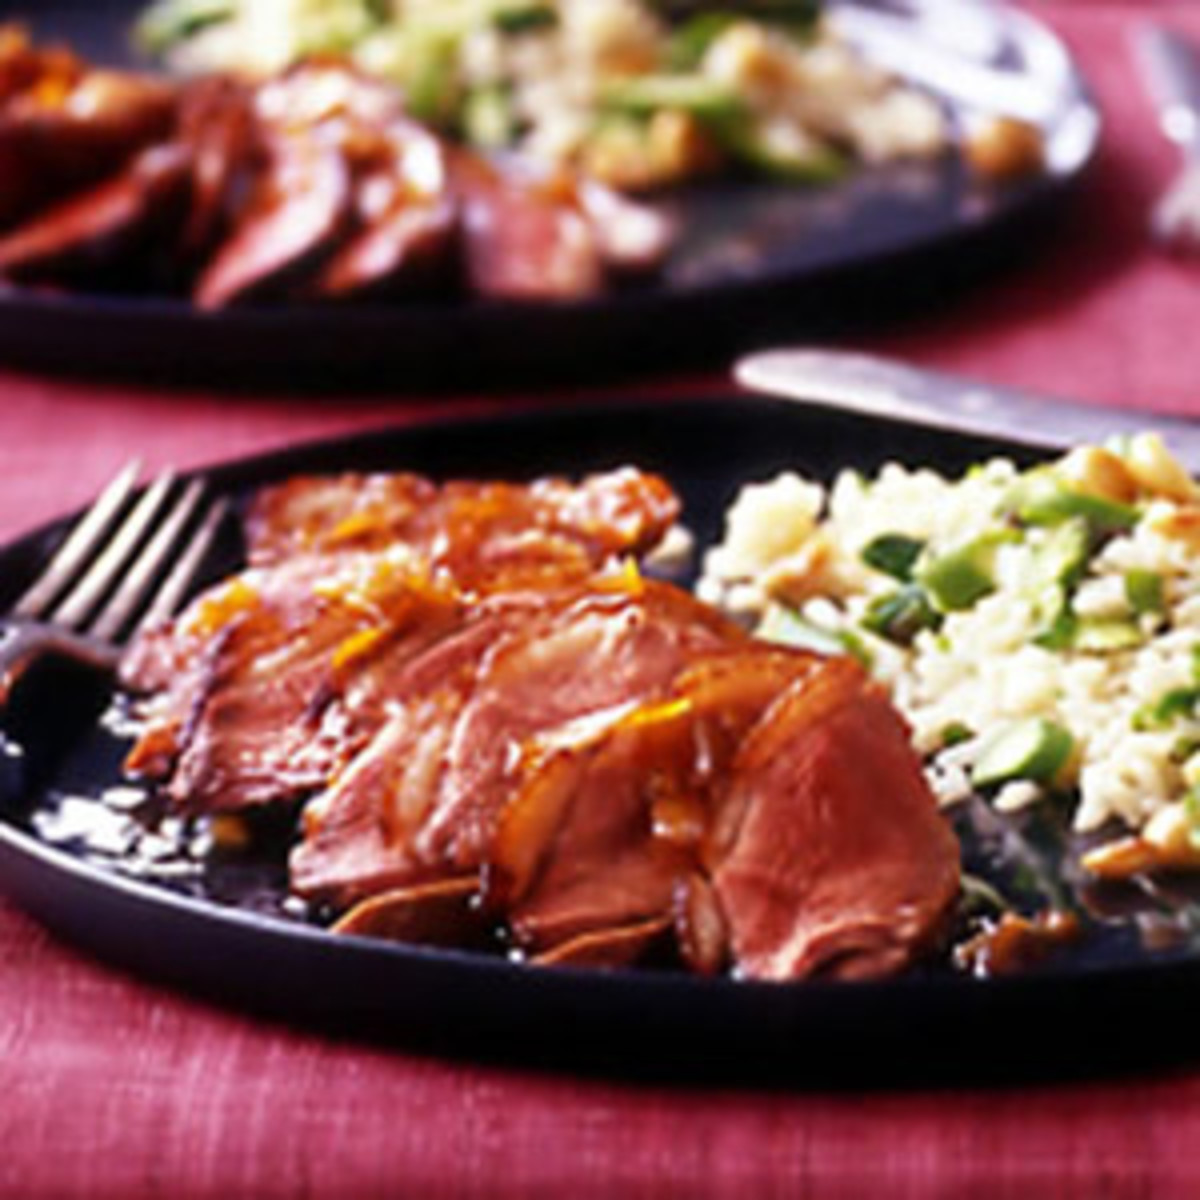 Rachael Ray Easter Dinner Menu
 New Year s Eve Dinner Rachael Ray Every Day